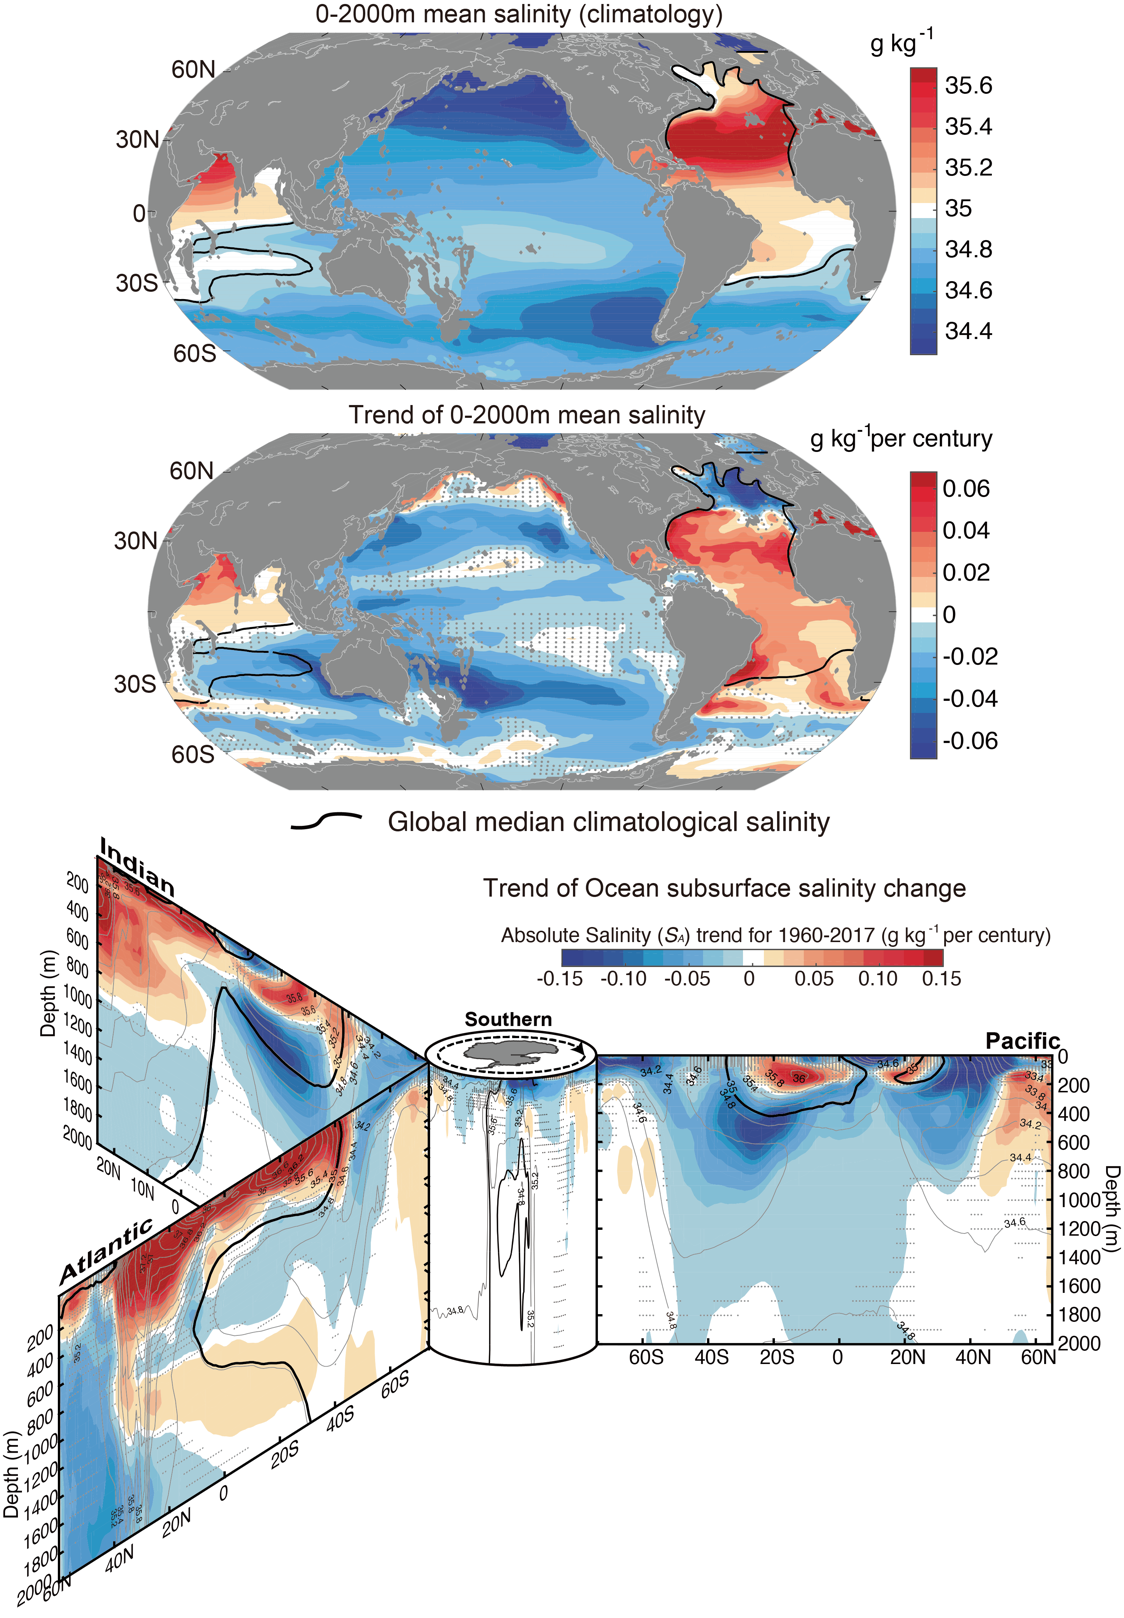 Vergrösserte Ansicht: Figure 2. 0-2000 mean salinity climatology (top) shows the relatively fresh Pacific versus the salty Atlantic northern Indian Ocean. Its long-term trend (middle) has a remarkably similar pattern. The zonal mean ocean salinity trends (bottom) since 1960 in each ocean basin, organized around the Southern Ocean in the center, depict the penetration of surface anomalies into the ocean subsurface.